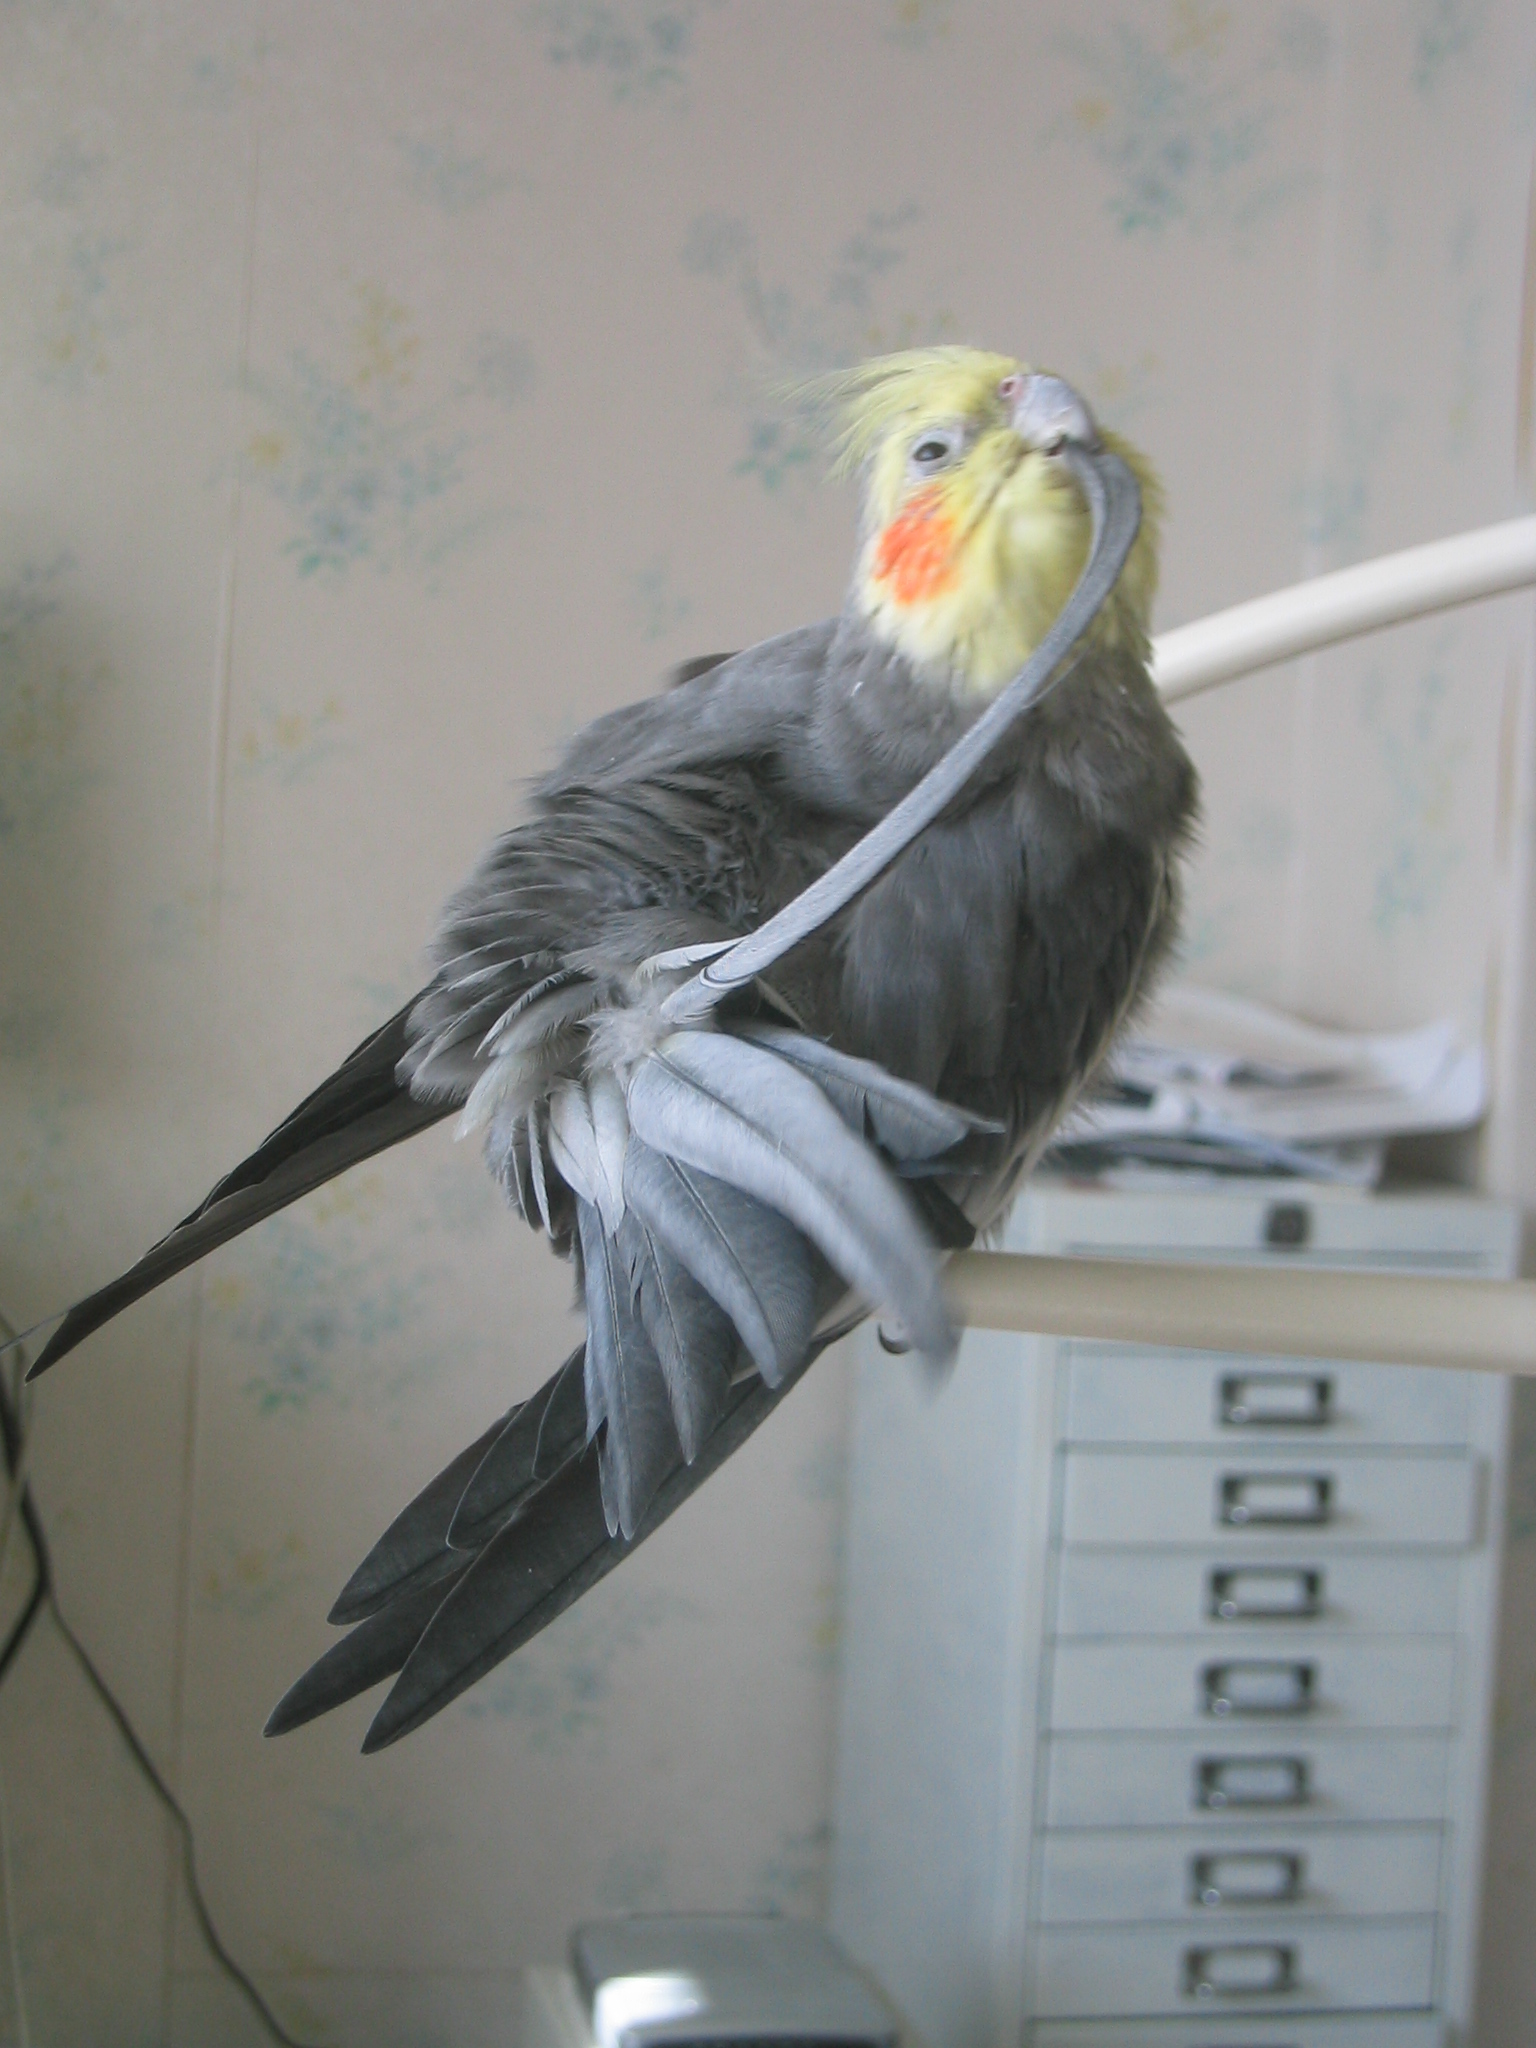 Must keep clean and fresh.  The longest feathers go 'ping'